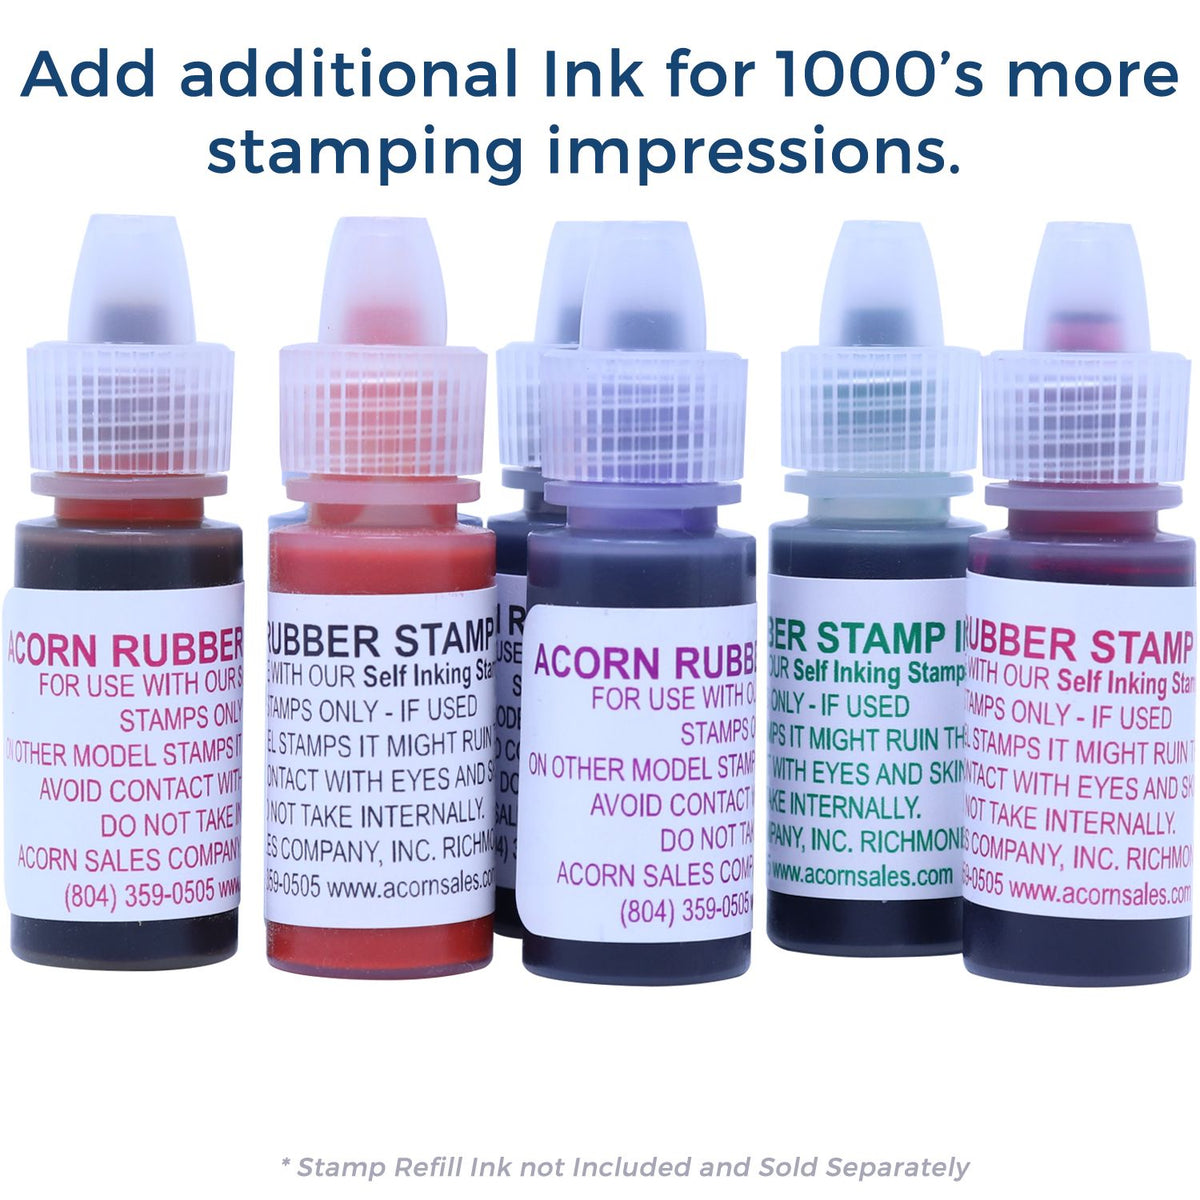 Refill Ink for Self-Inking Round Great Work with Calculator Stamp Available